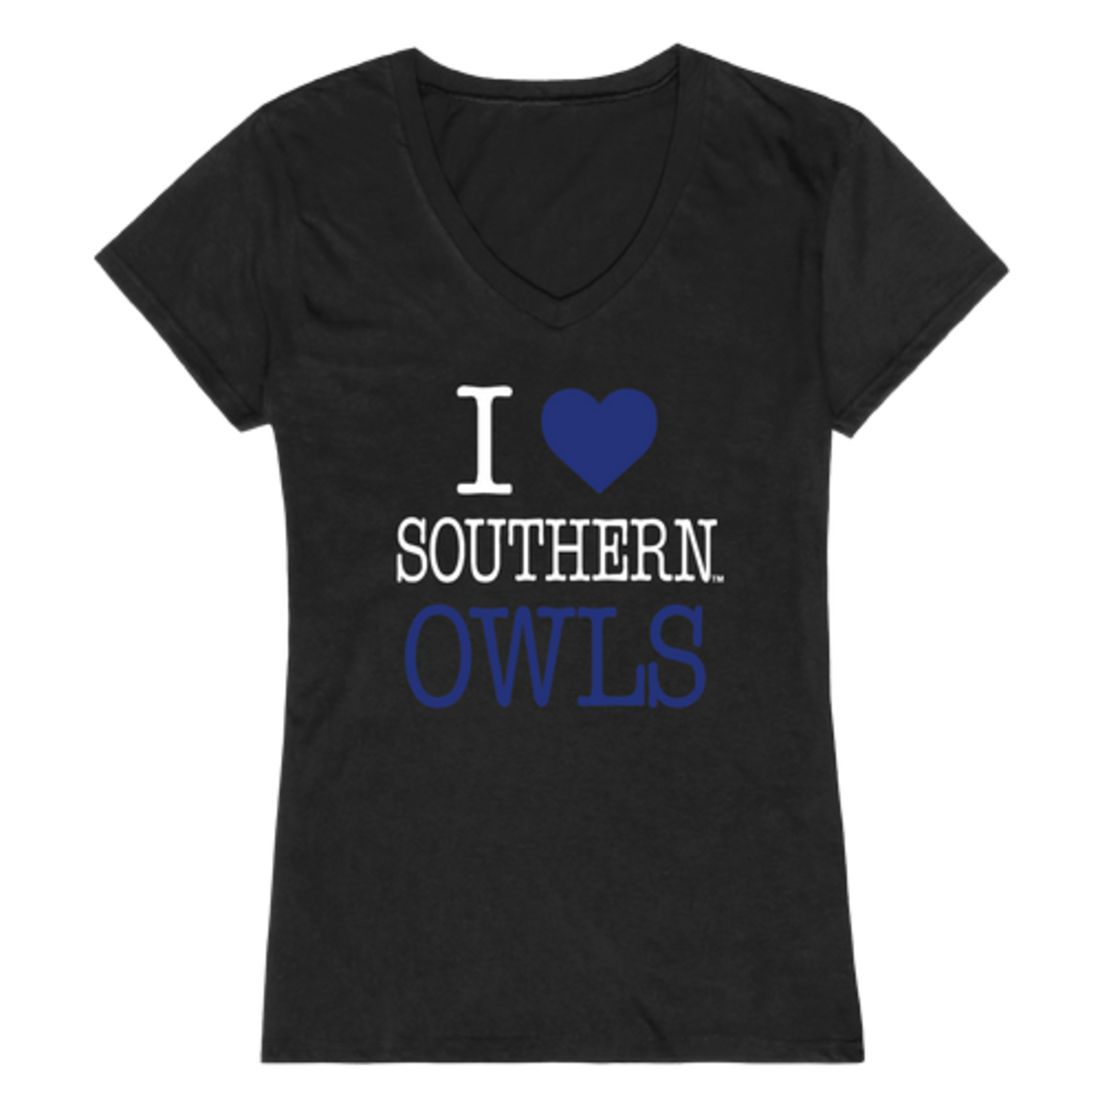 I Love Southern Connecticut State University Owls Womens T-Shirt Tee